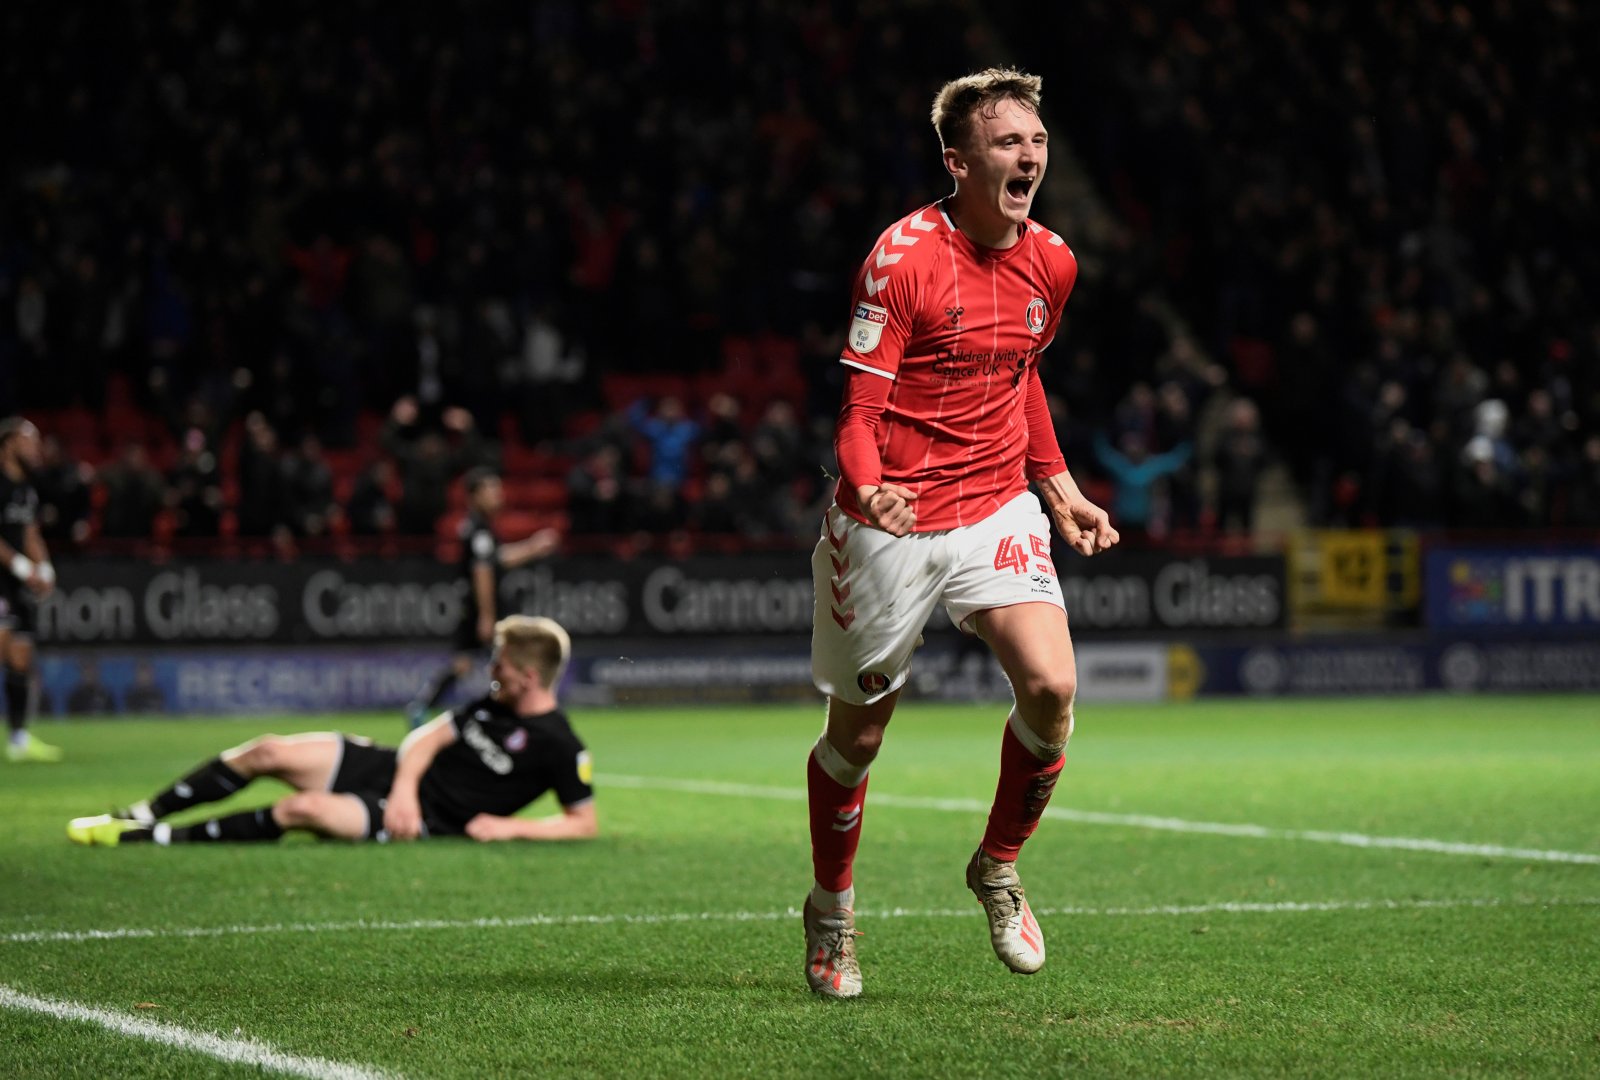 Alfie Doughty established himself as a key member for Charlton towards the end of the 2019/20 campaign (Image credit: Google)